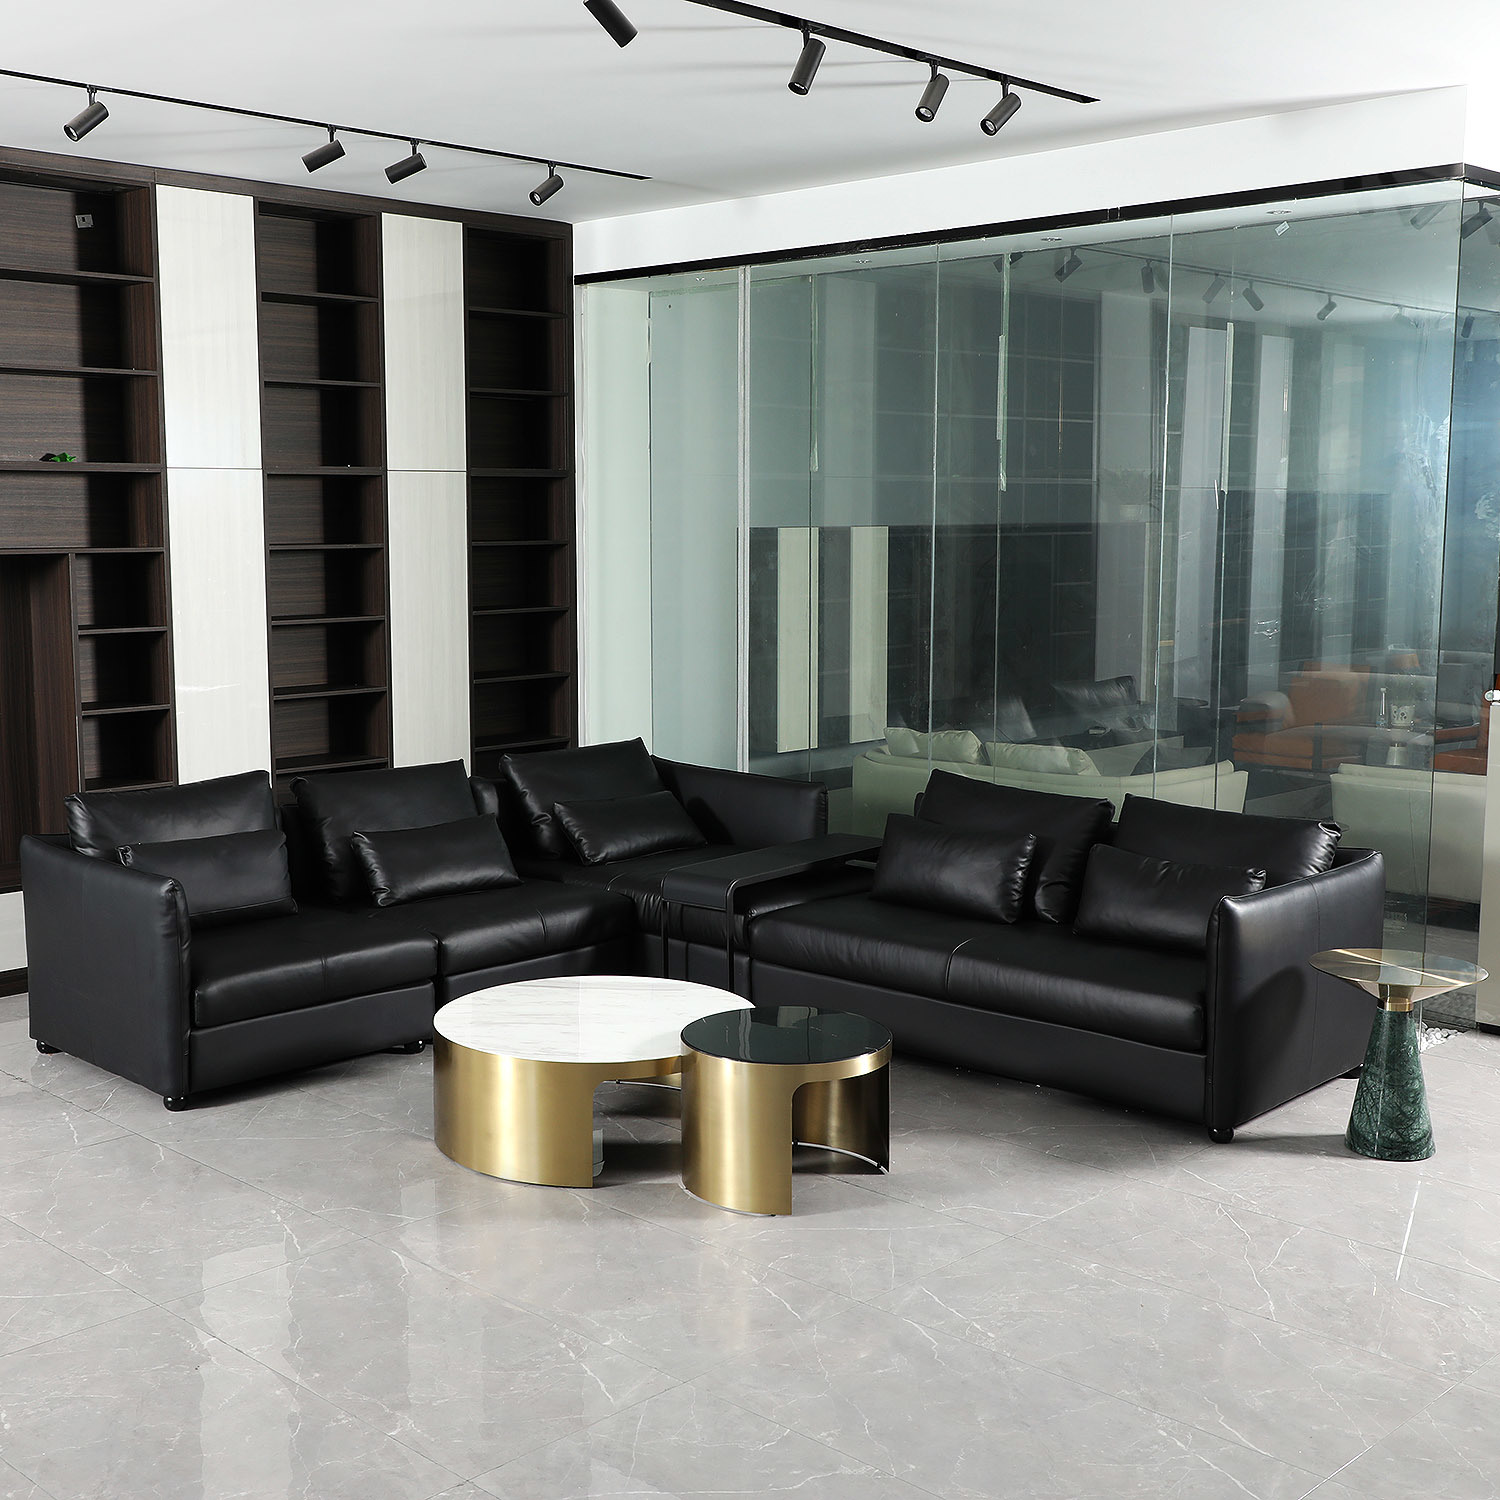 Modern Office Hotel Furniture Luxury Design Sectional Leather Sofa